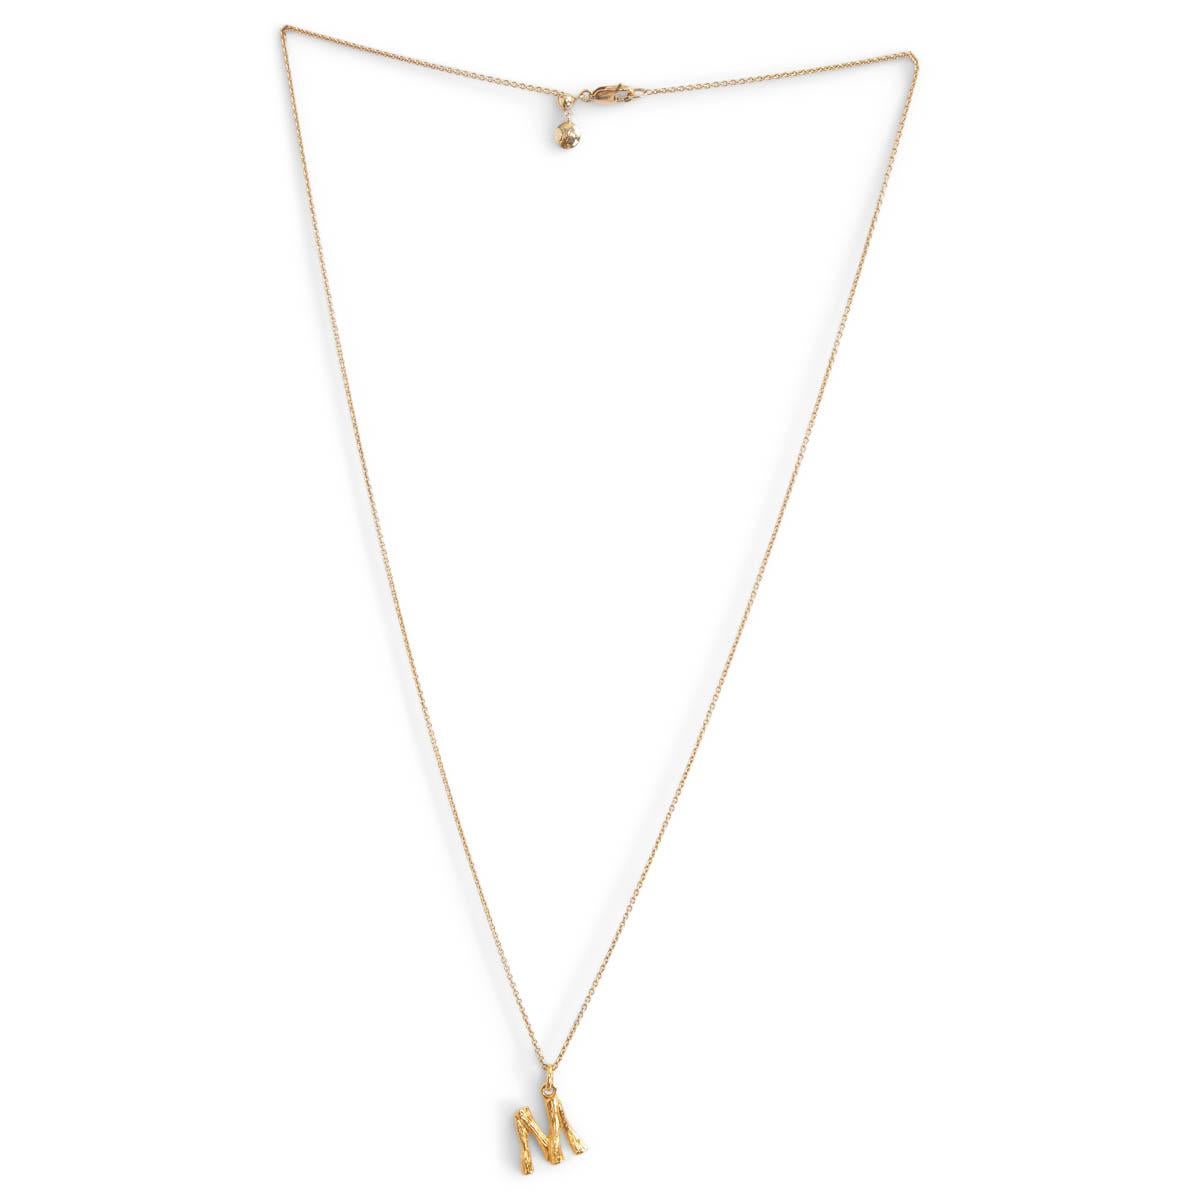 100% authentic Céline alpahbet necklace M in gold plated brass. Has been worn and is in excellent condition. Comes with box and dust bag. 

Measurements
Width	1.5cm (0.6in)
Height	1.5cm (0.6in)
Length	33cm (12.9in)
Hardware	Gold-Tone

All our